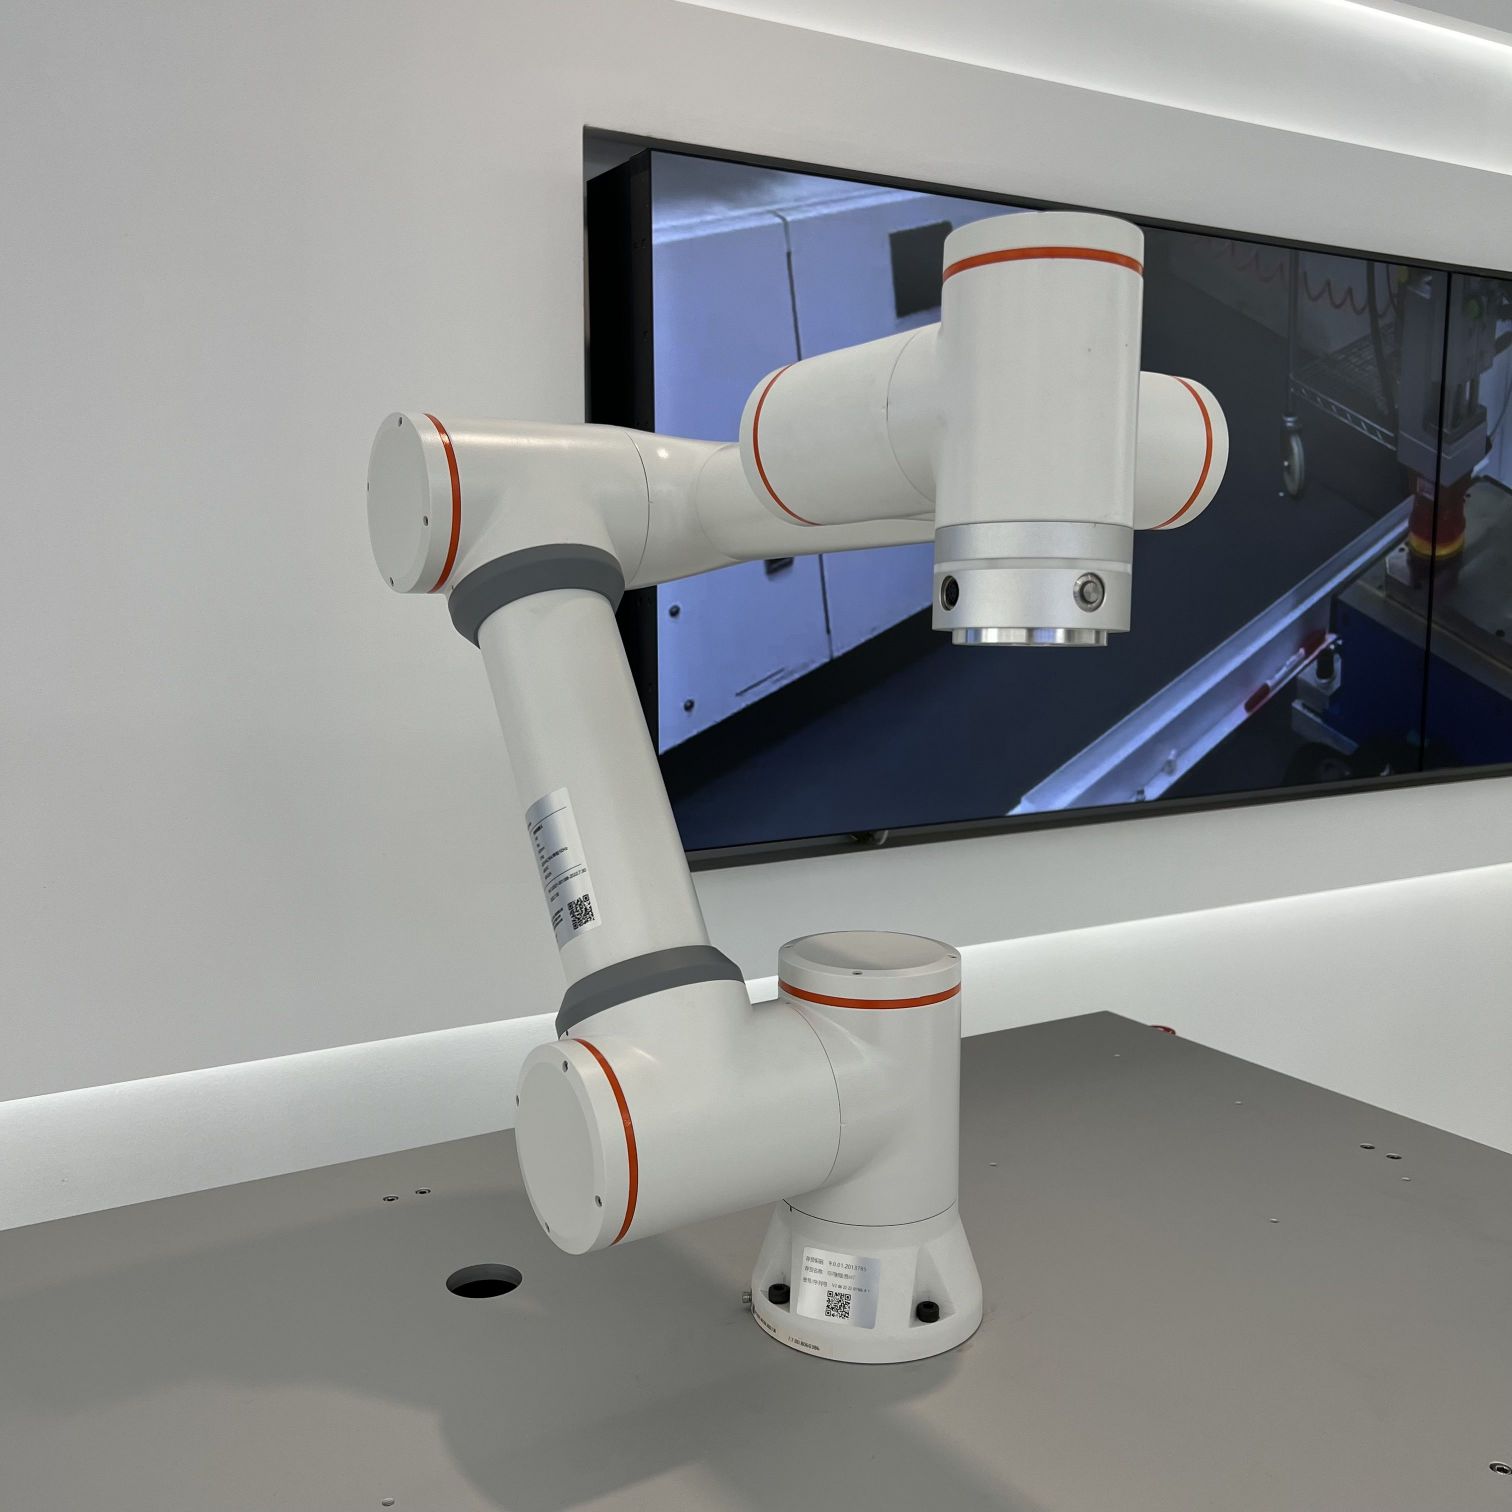 FR5 Collaborative Robot 6 Axis Robotic Arm Intelligent Human-machine Cooperation System Solutions